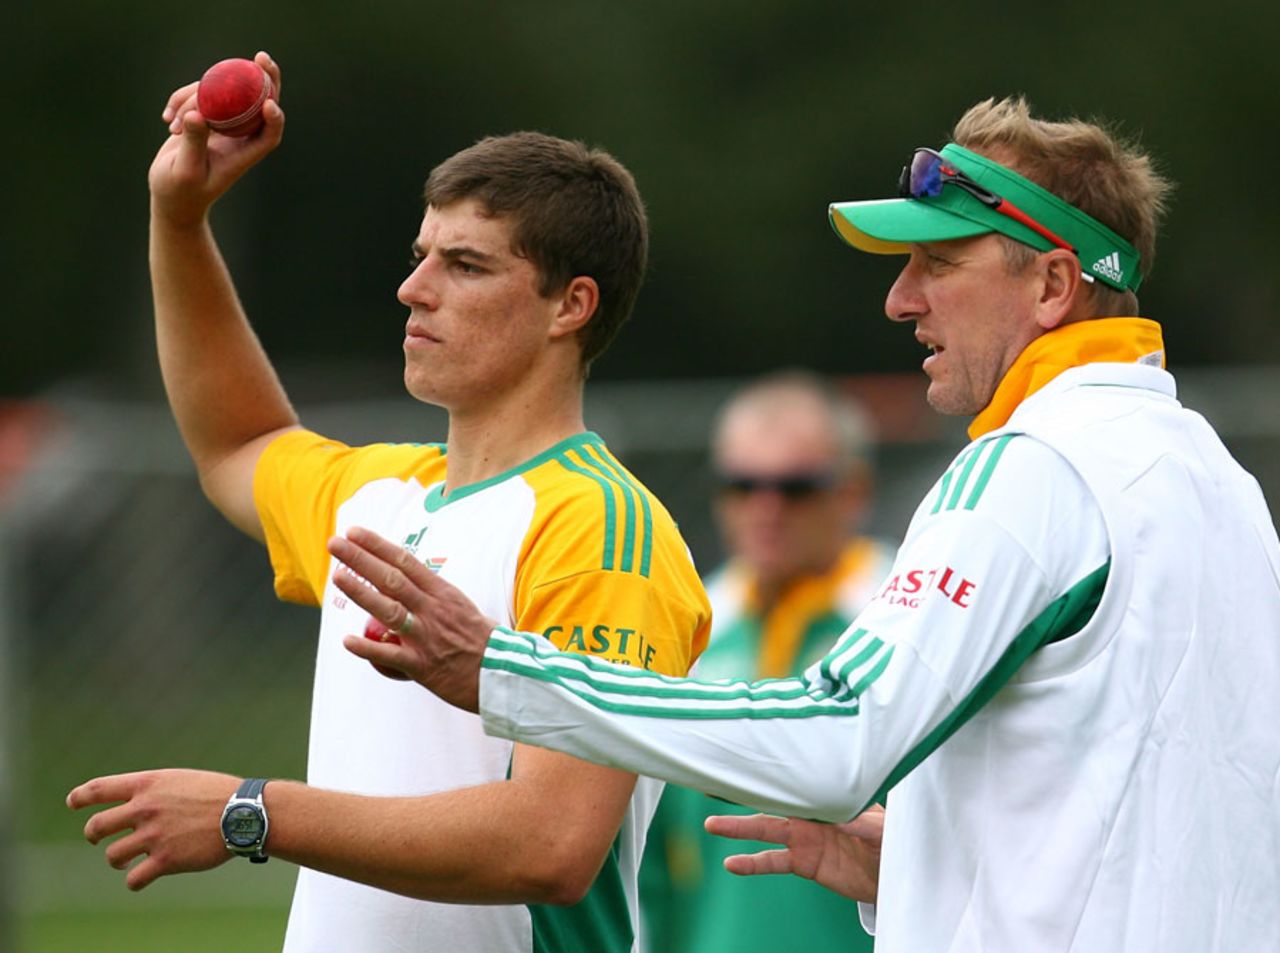 Allan Donald has a word with Marchant de Lange during a training session, Dunedin, March 6, 2012